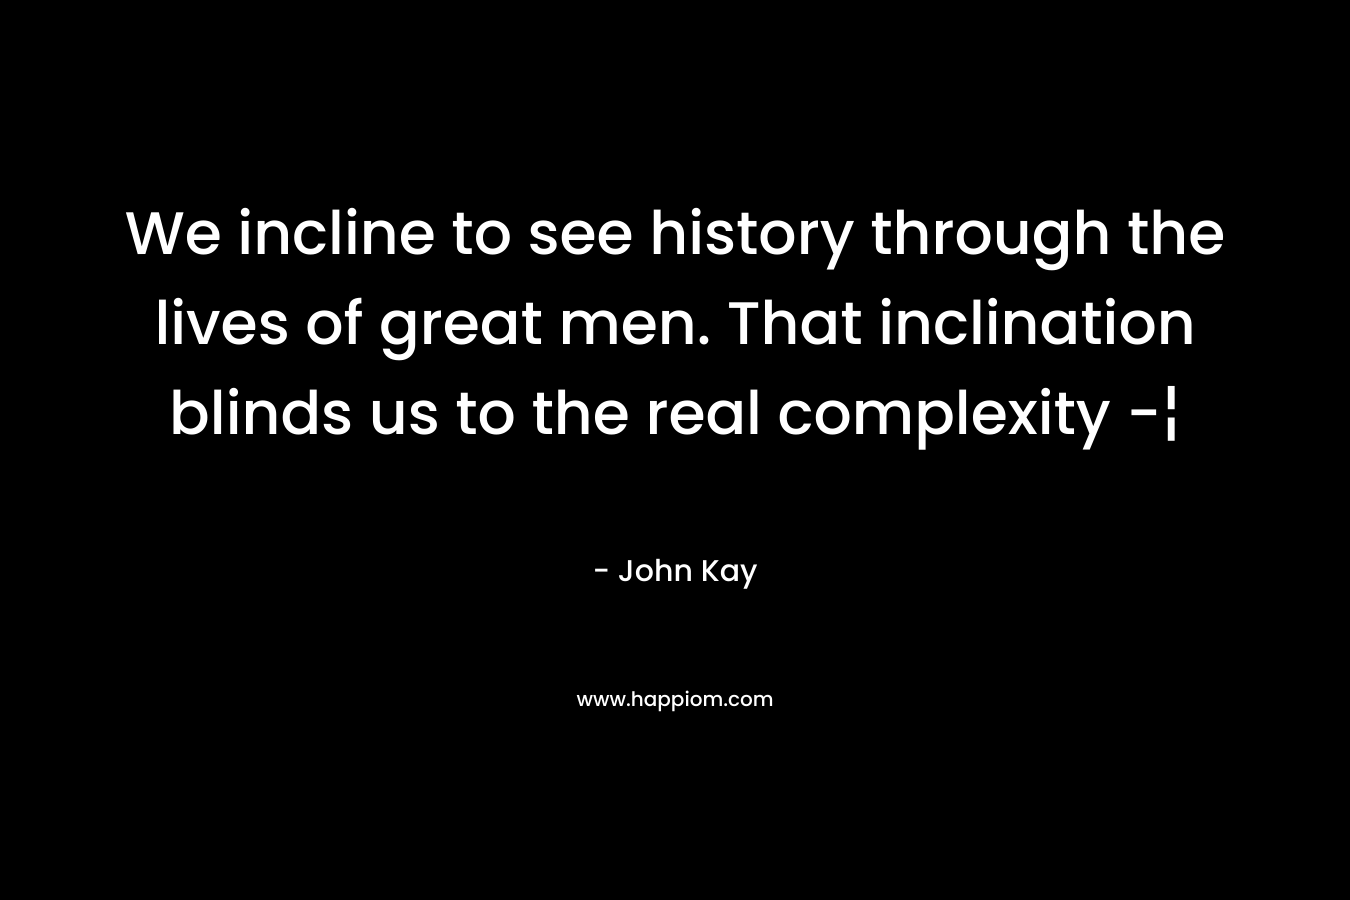 We incline to see history through the lives of great men. That inclination blinds us to the real complexity -¦